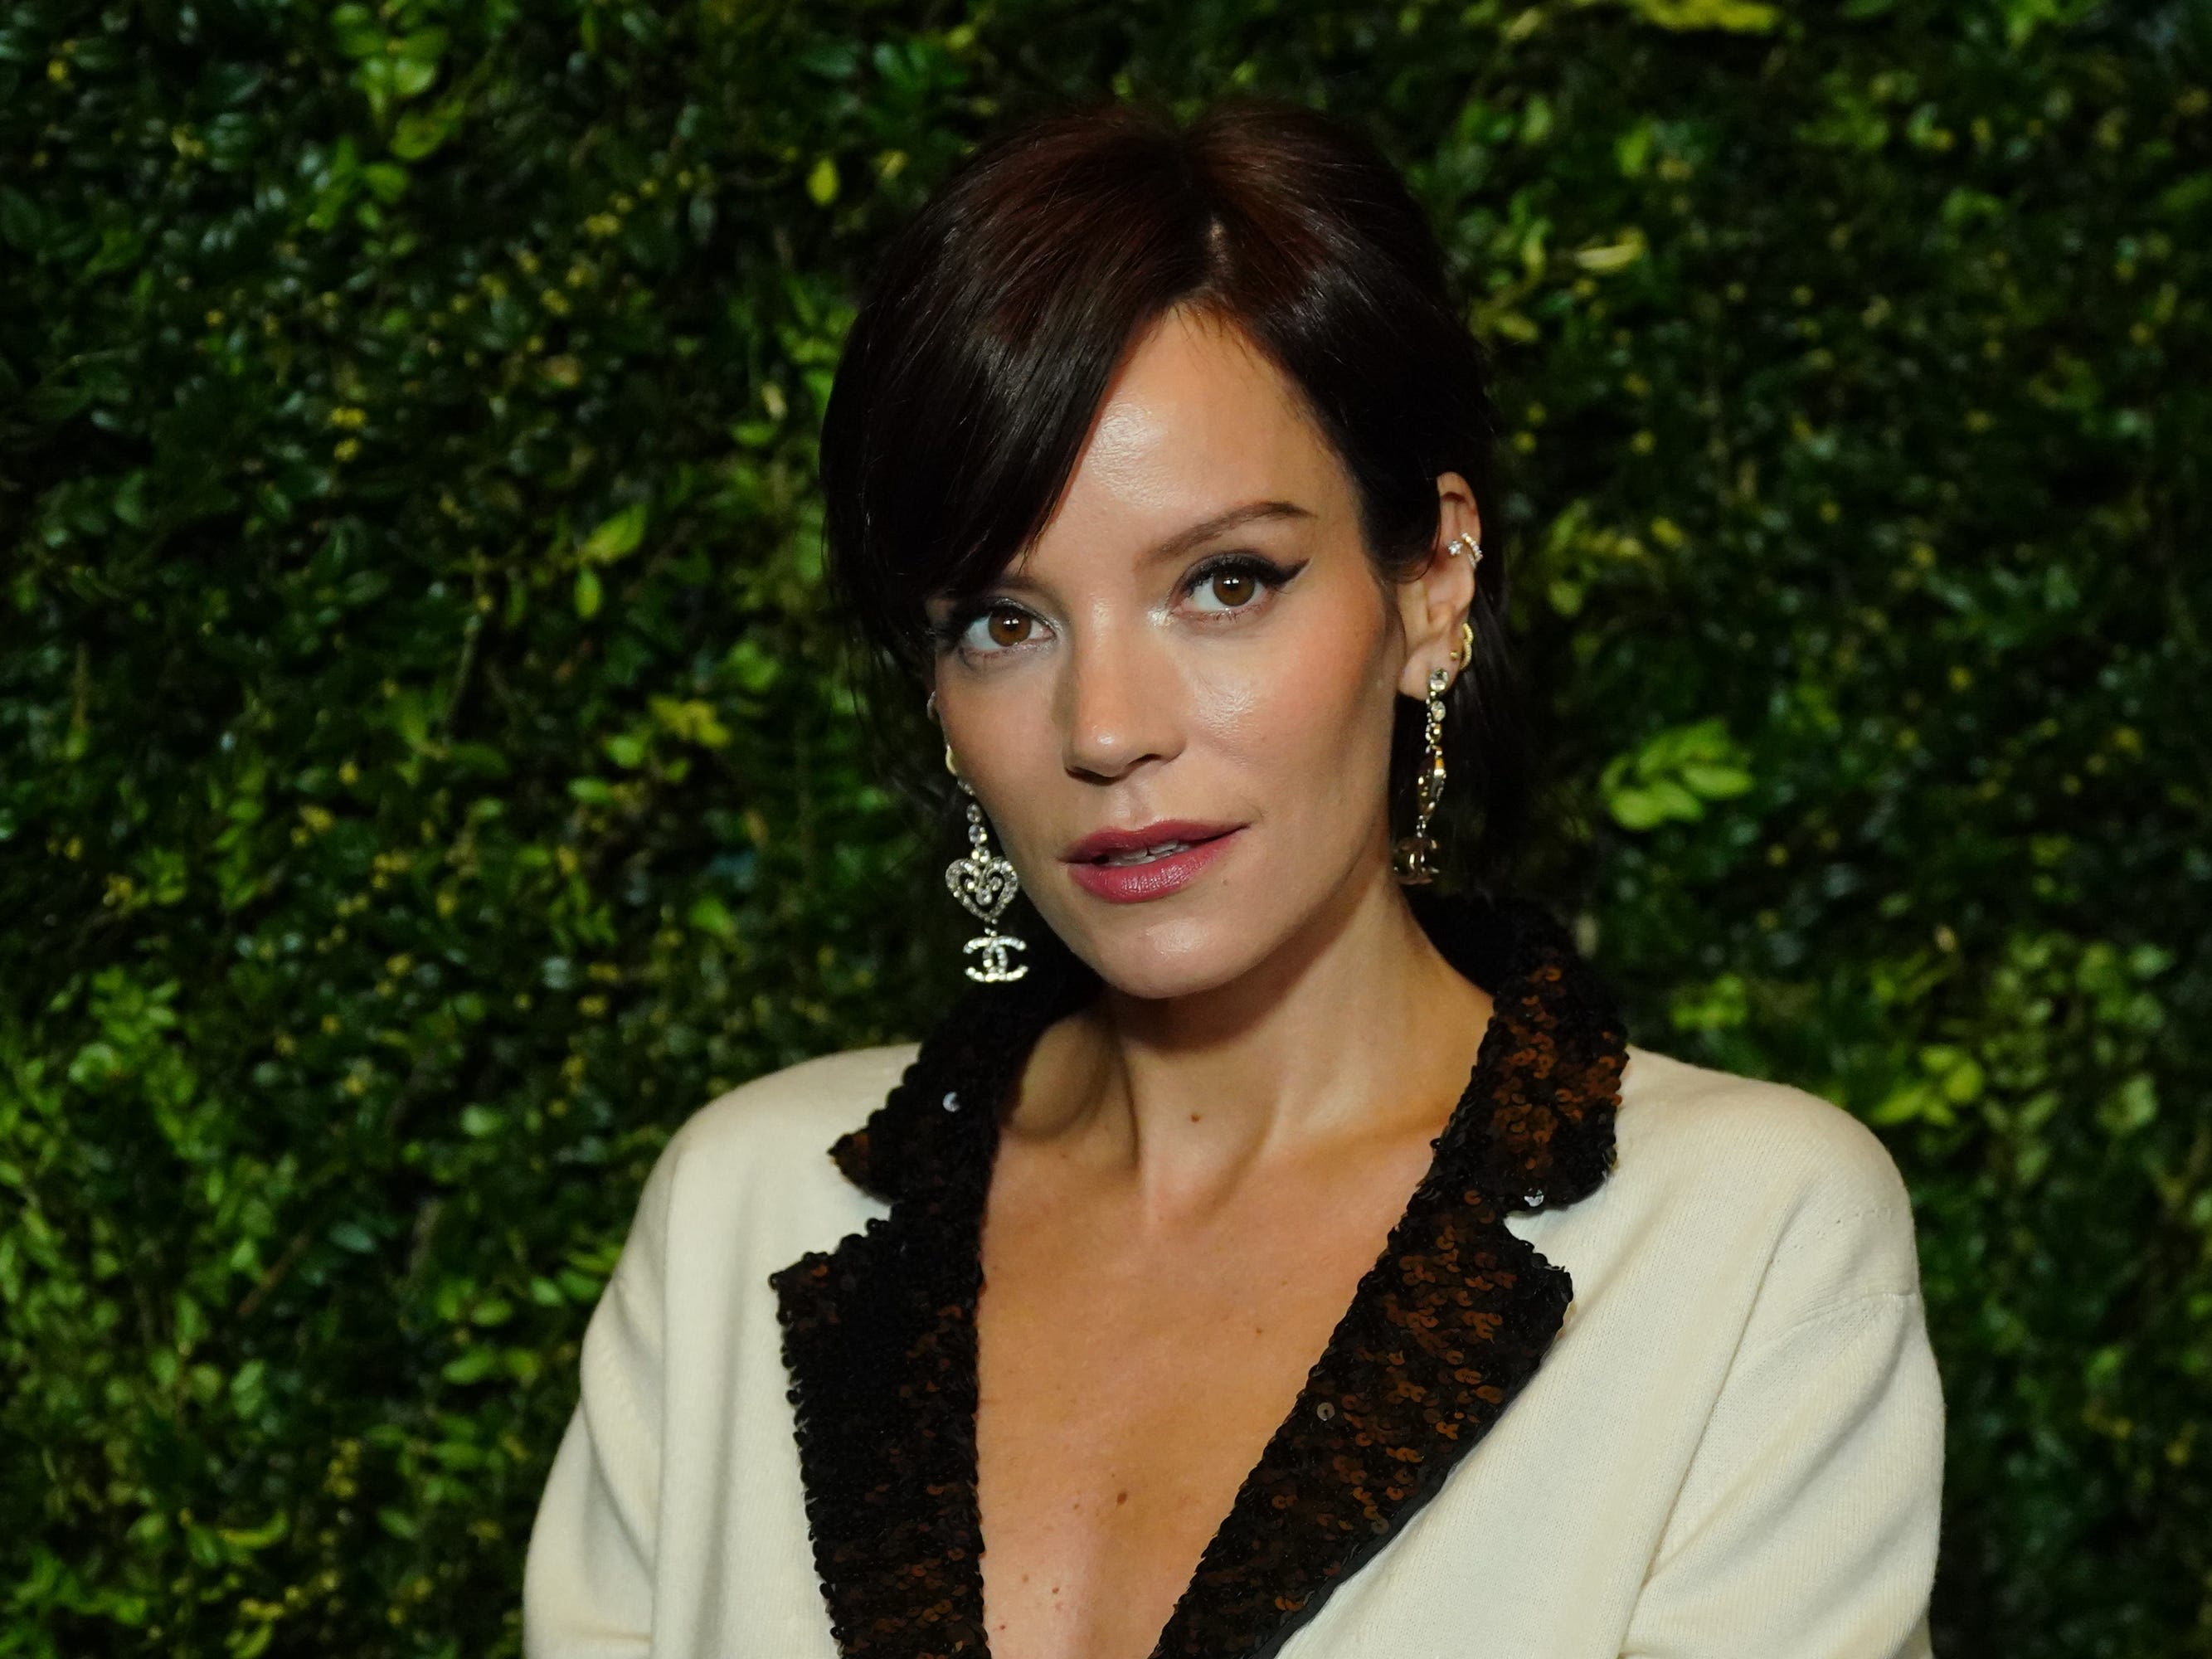 Lily Allen calls out the 'nepo baby' label for almost always being used against women, likening it to the term 'Karen'